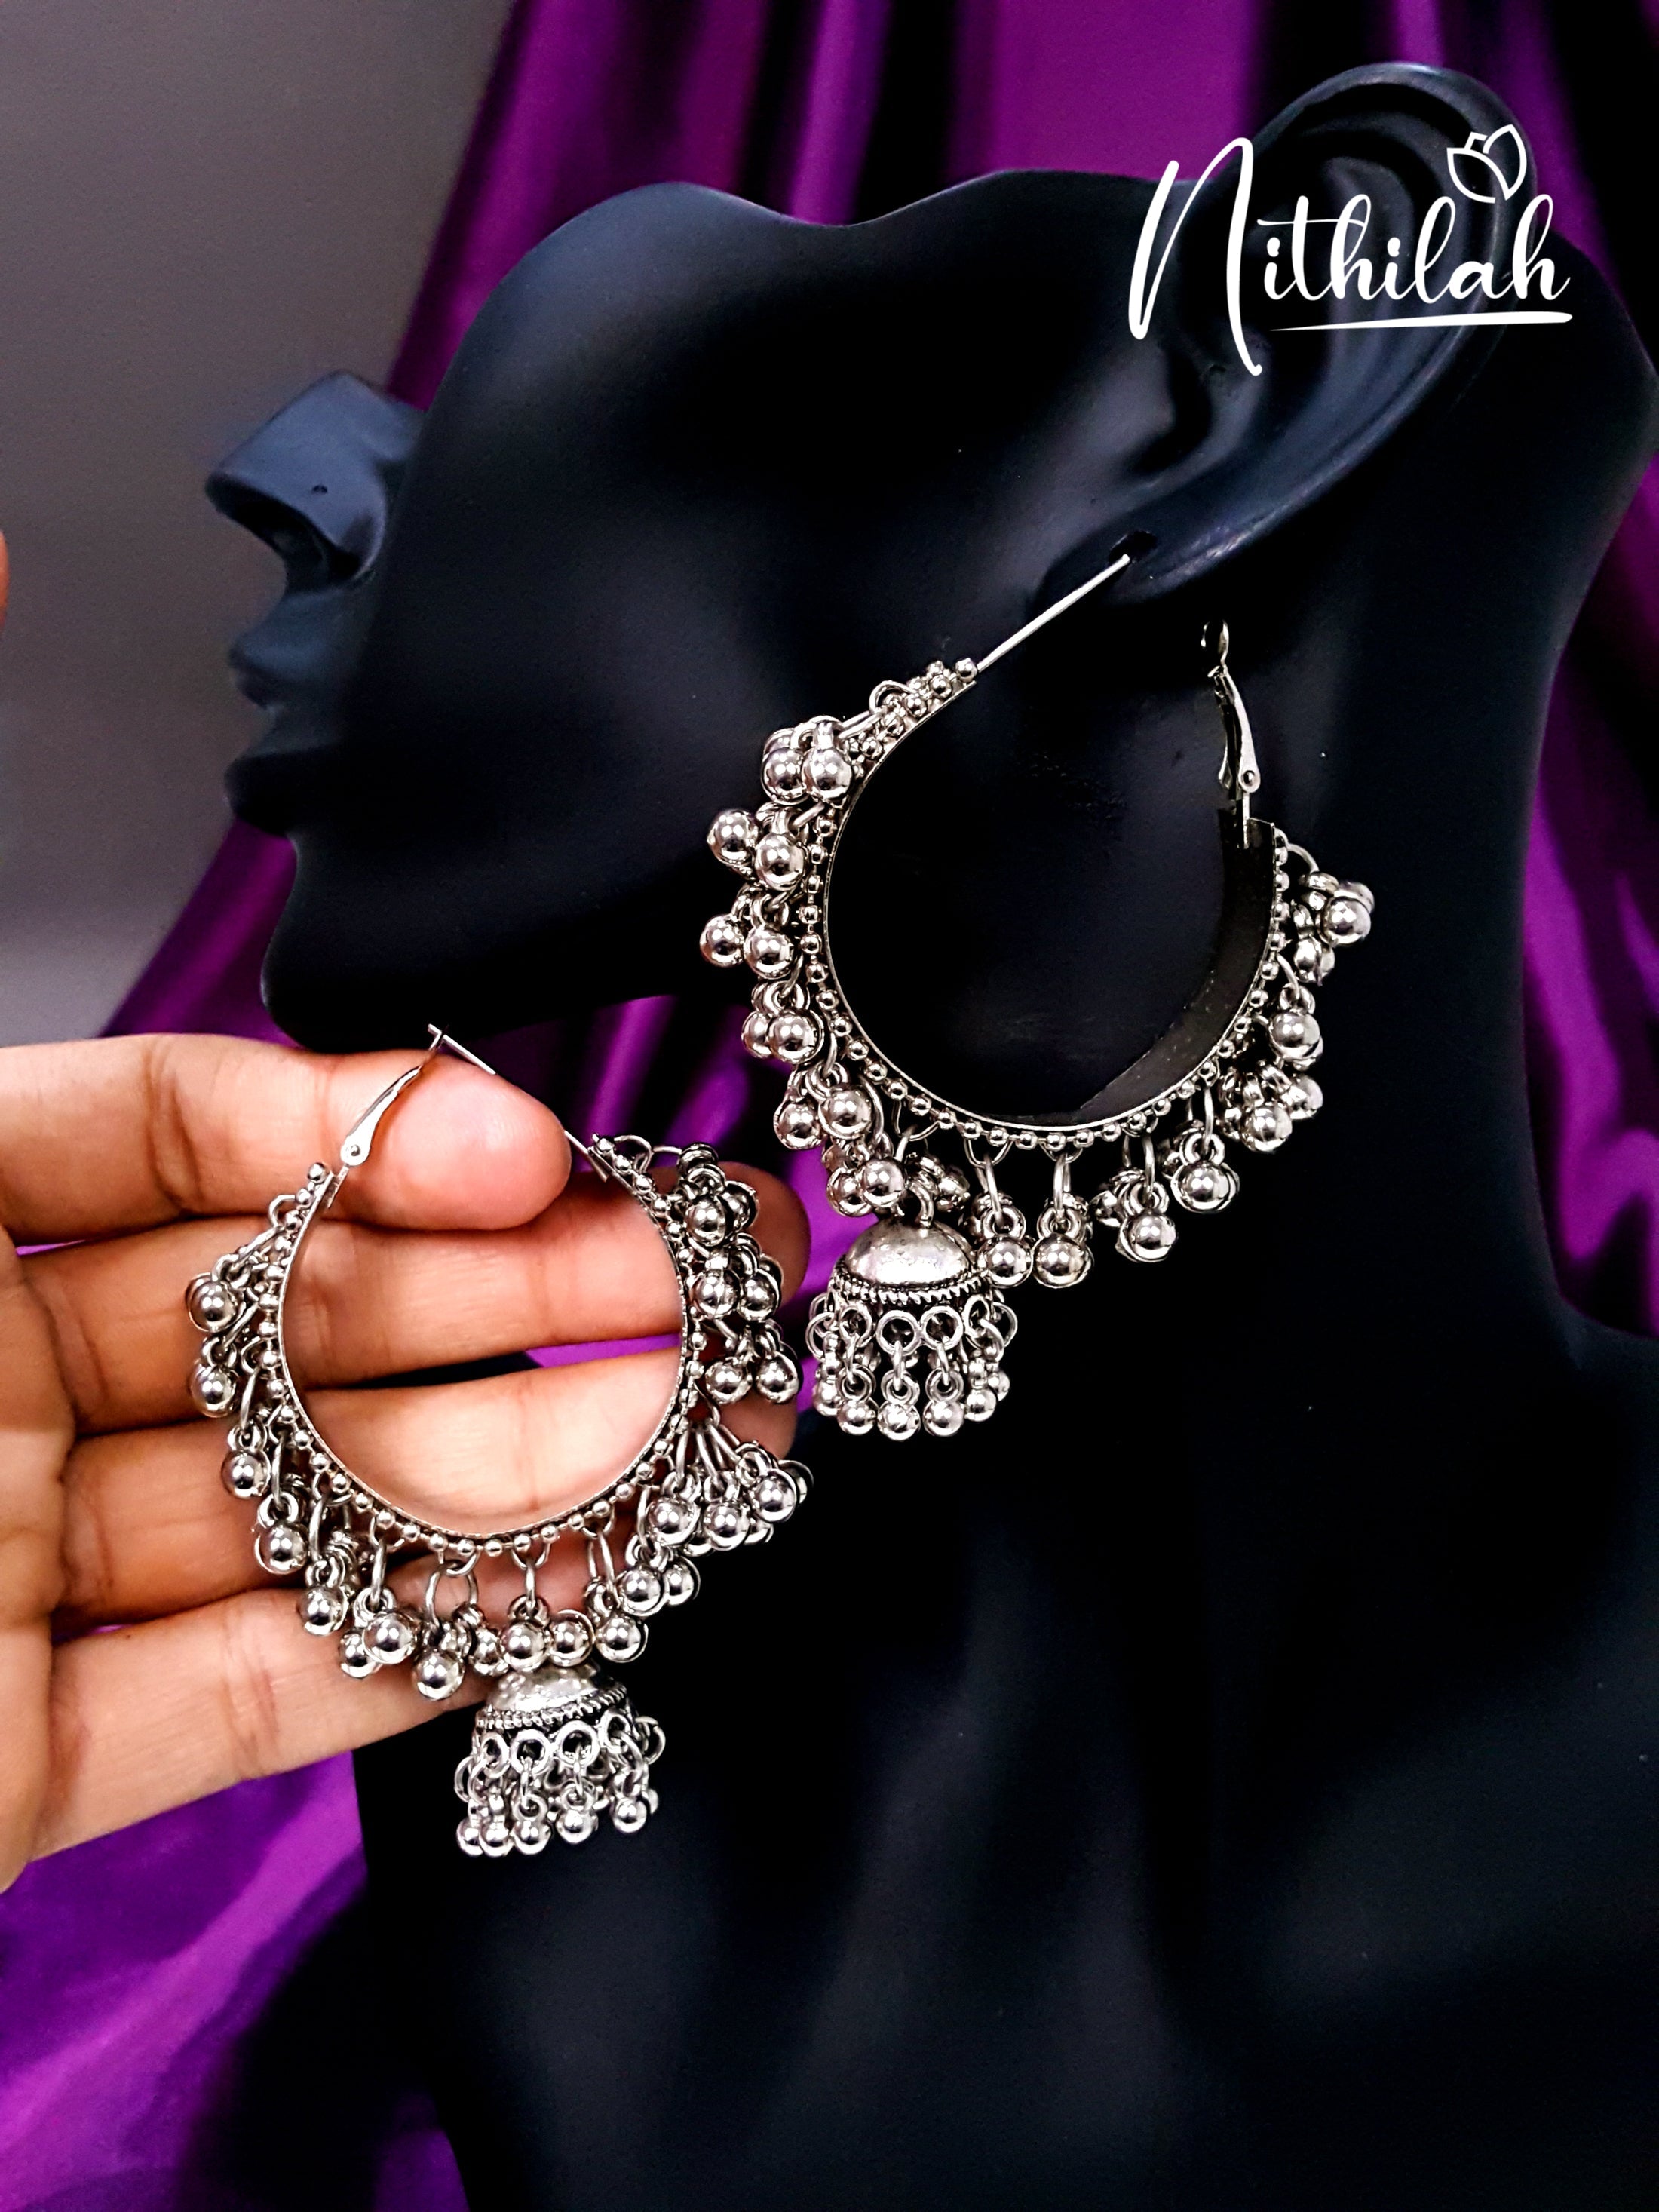 Difference Between Oxidised Silver & Sterling Silver Earrings - Nithilah